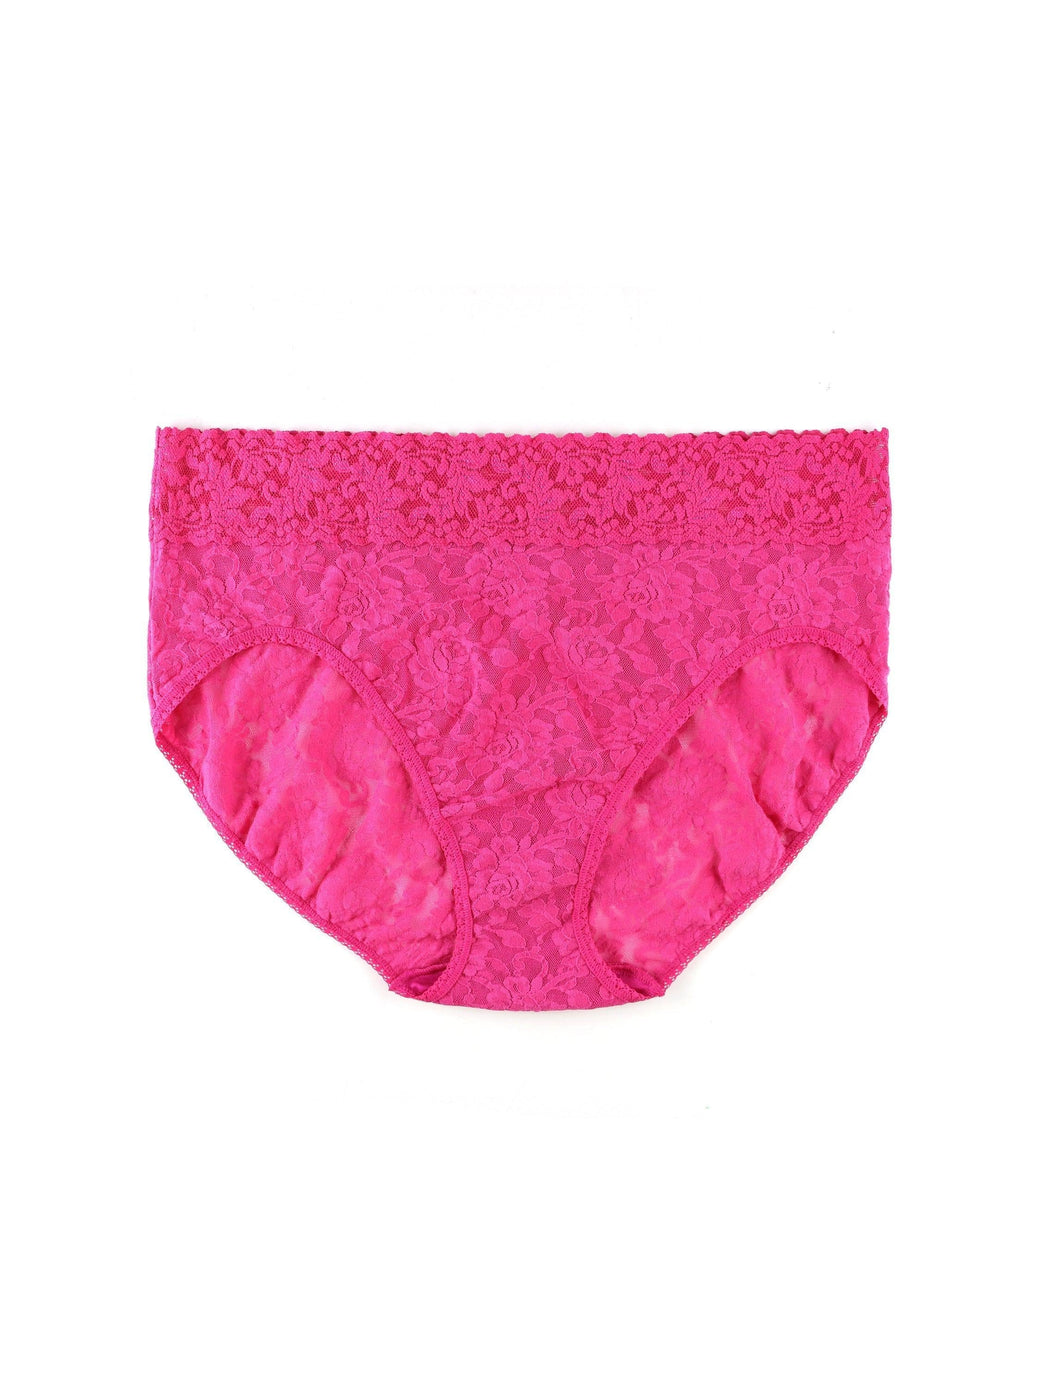 Plus Size Signature Lace French Brief Intuition Pink